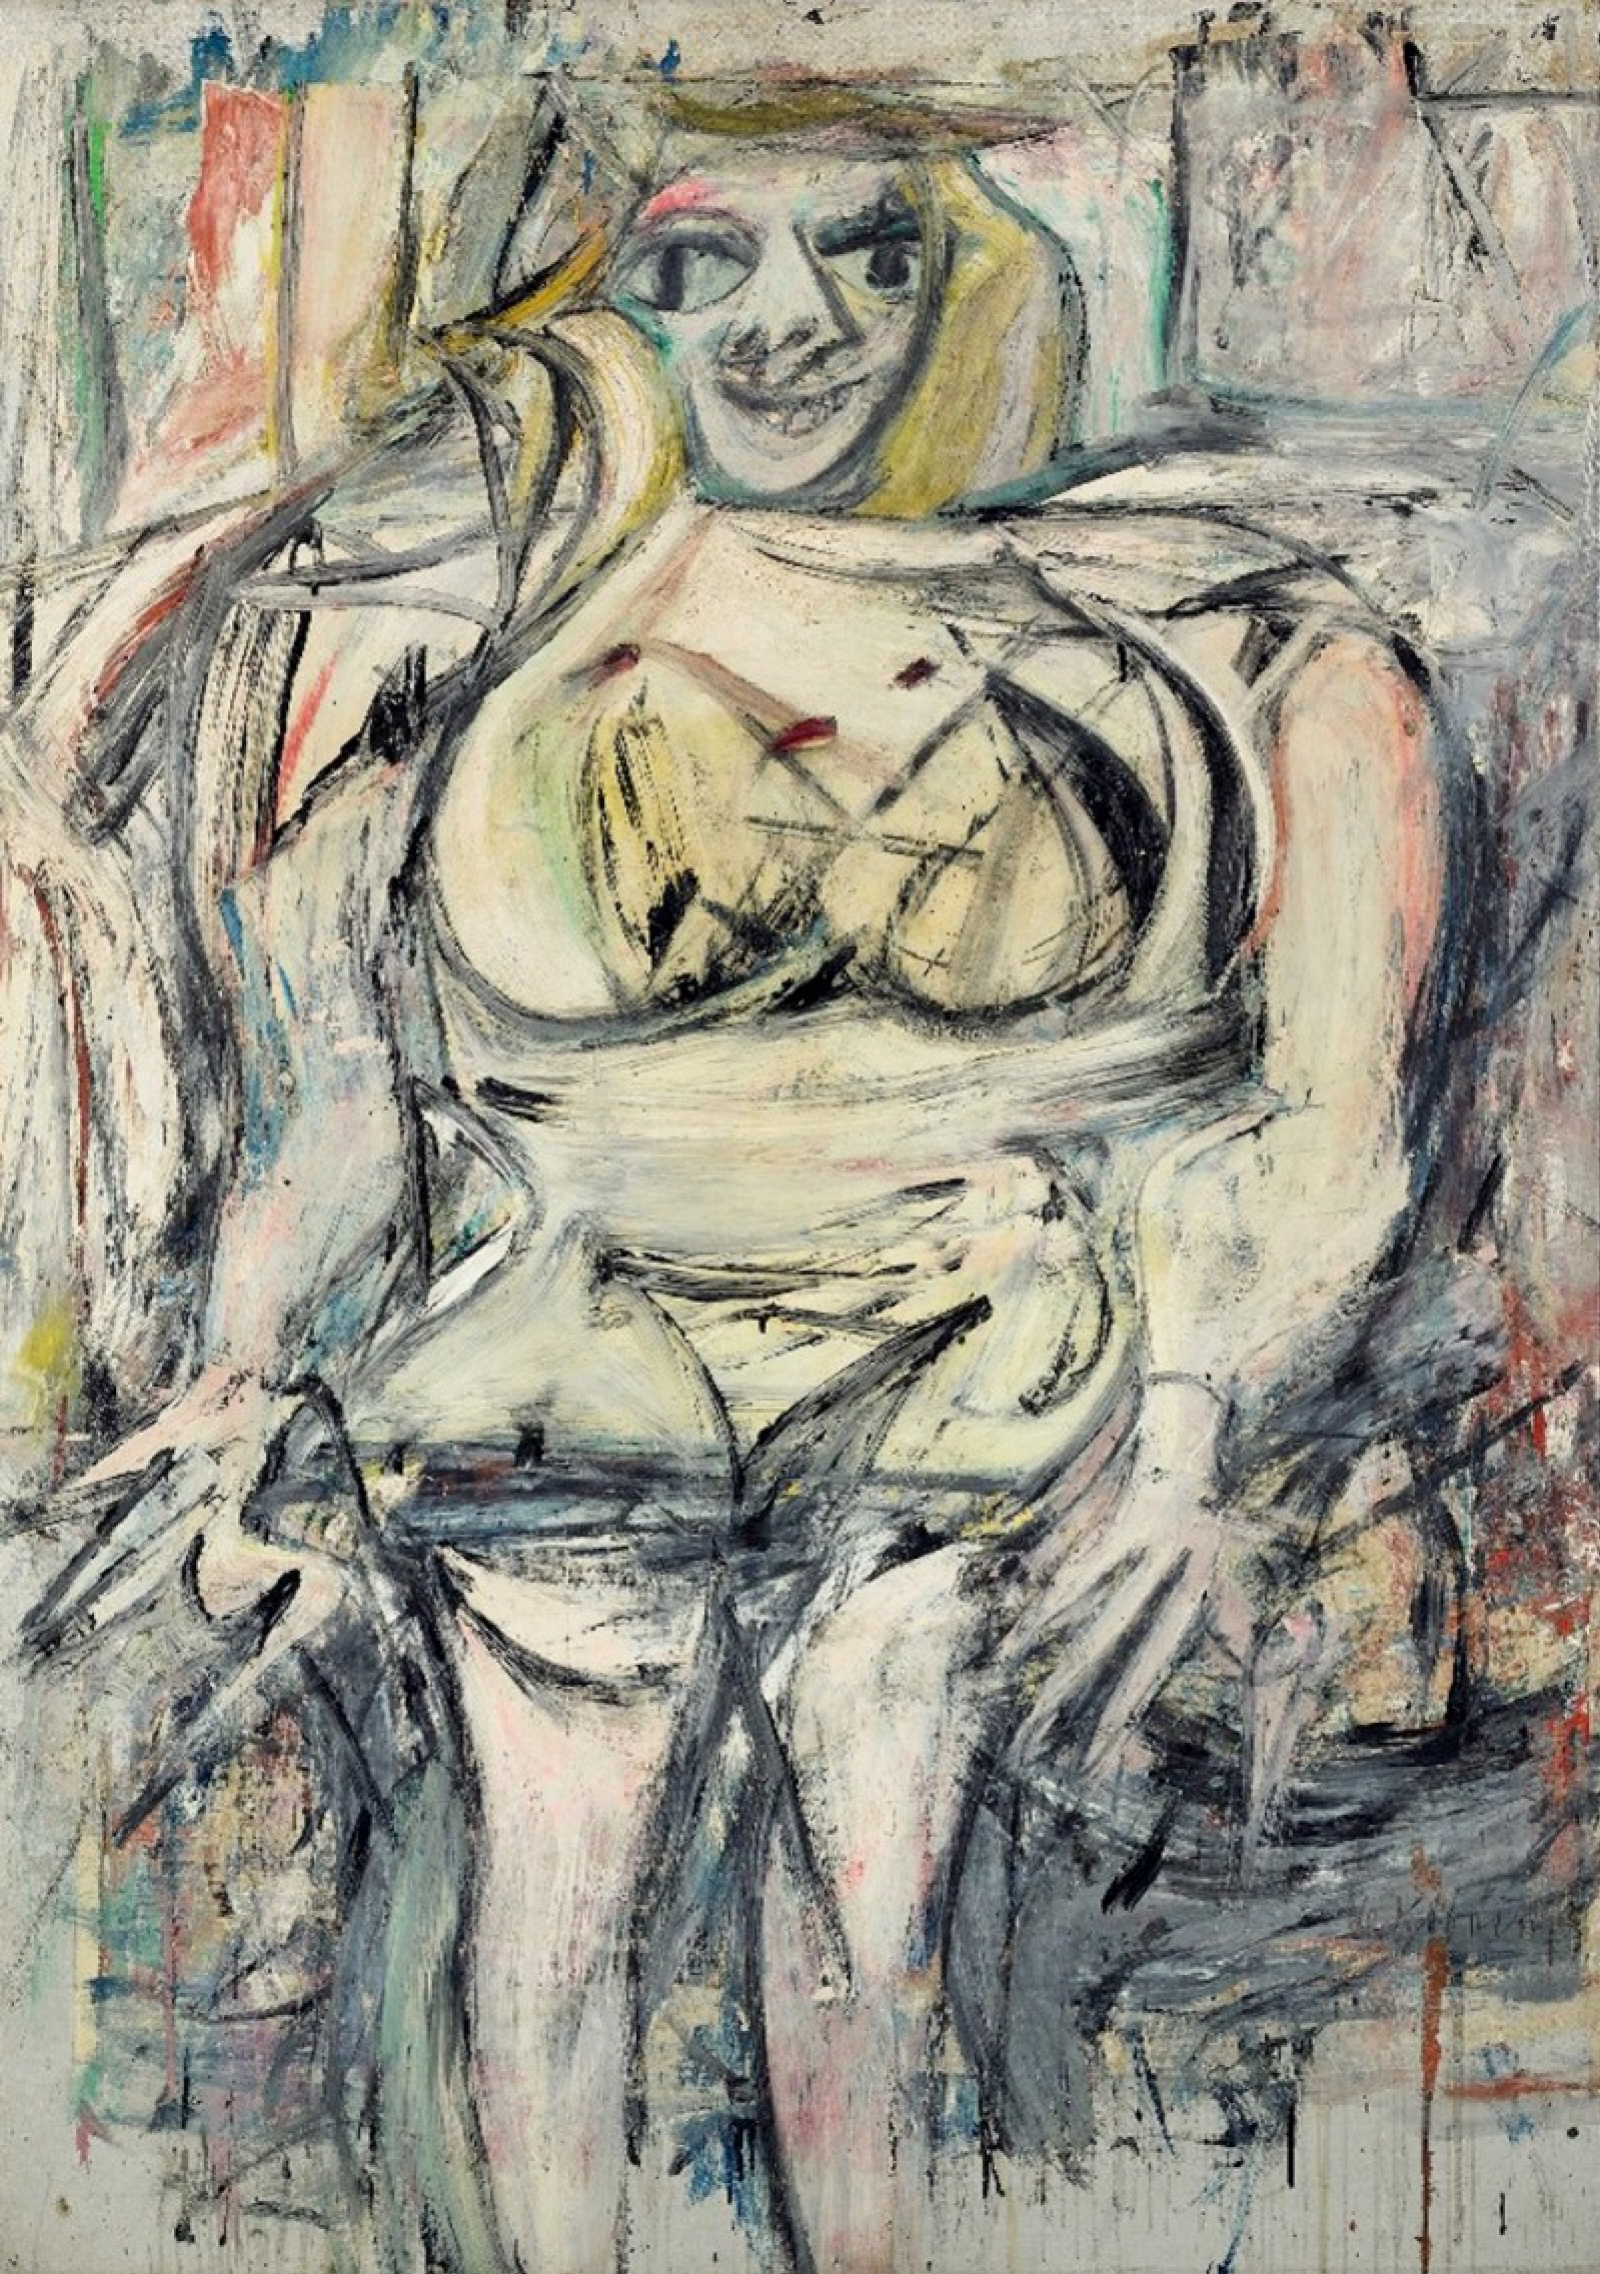 This de Kooning painting is the abstract painting my art presentation is focused on.